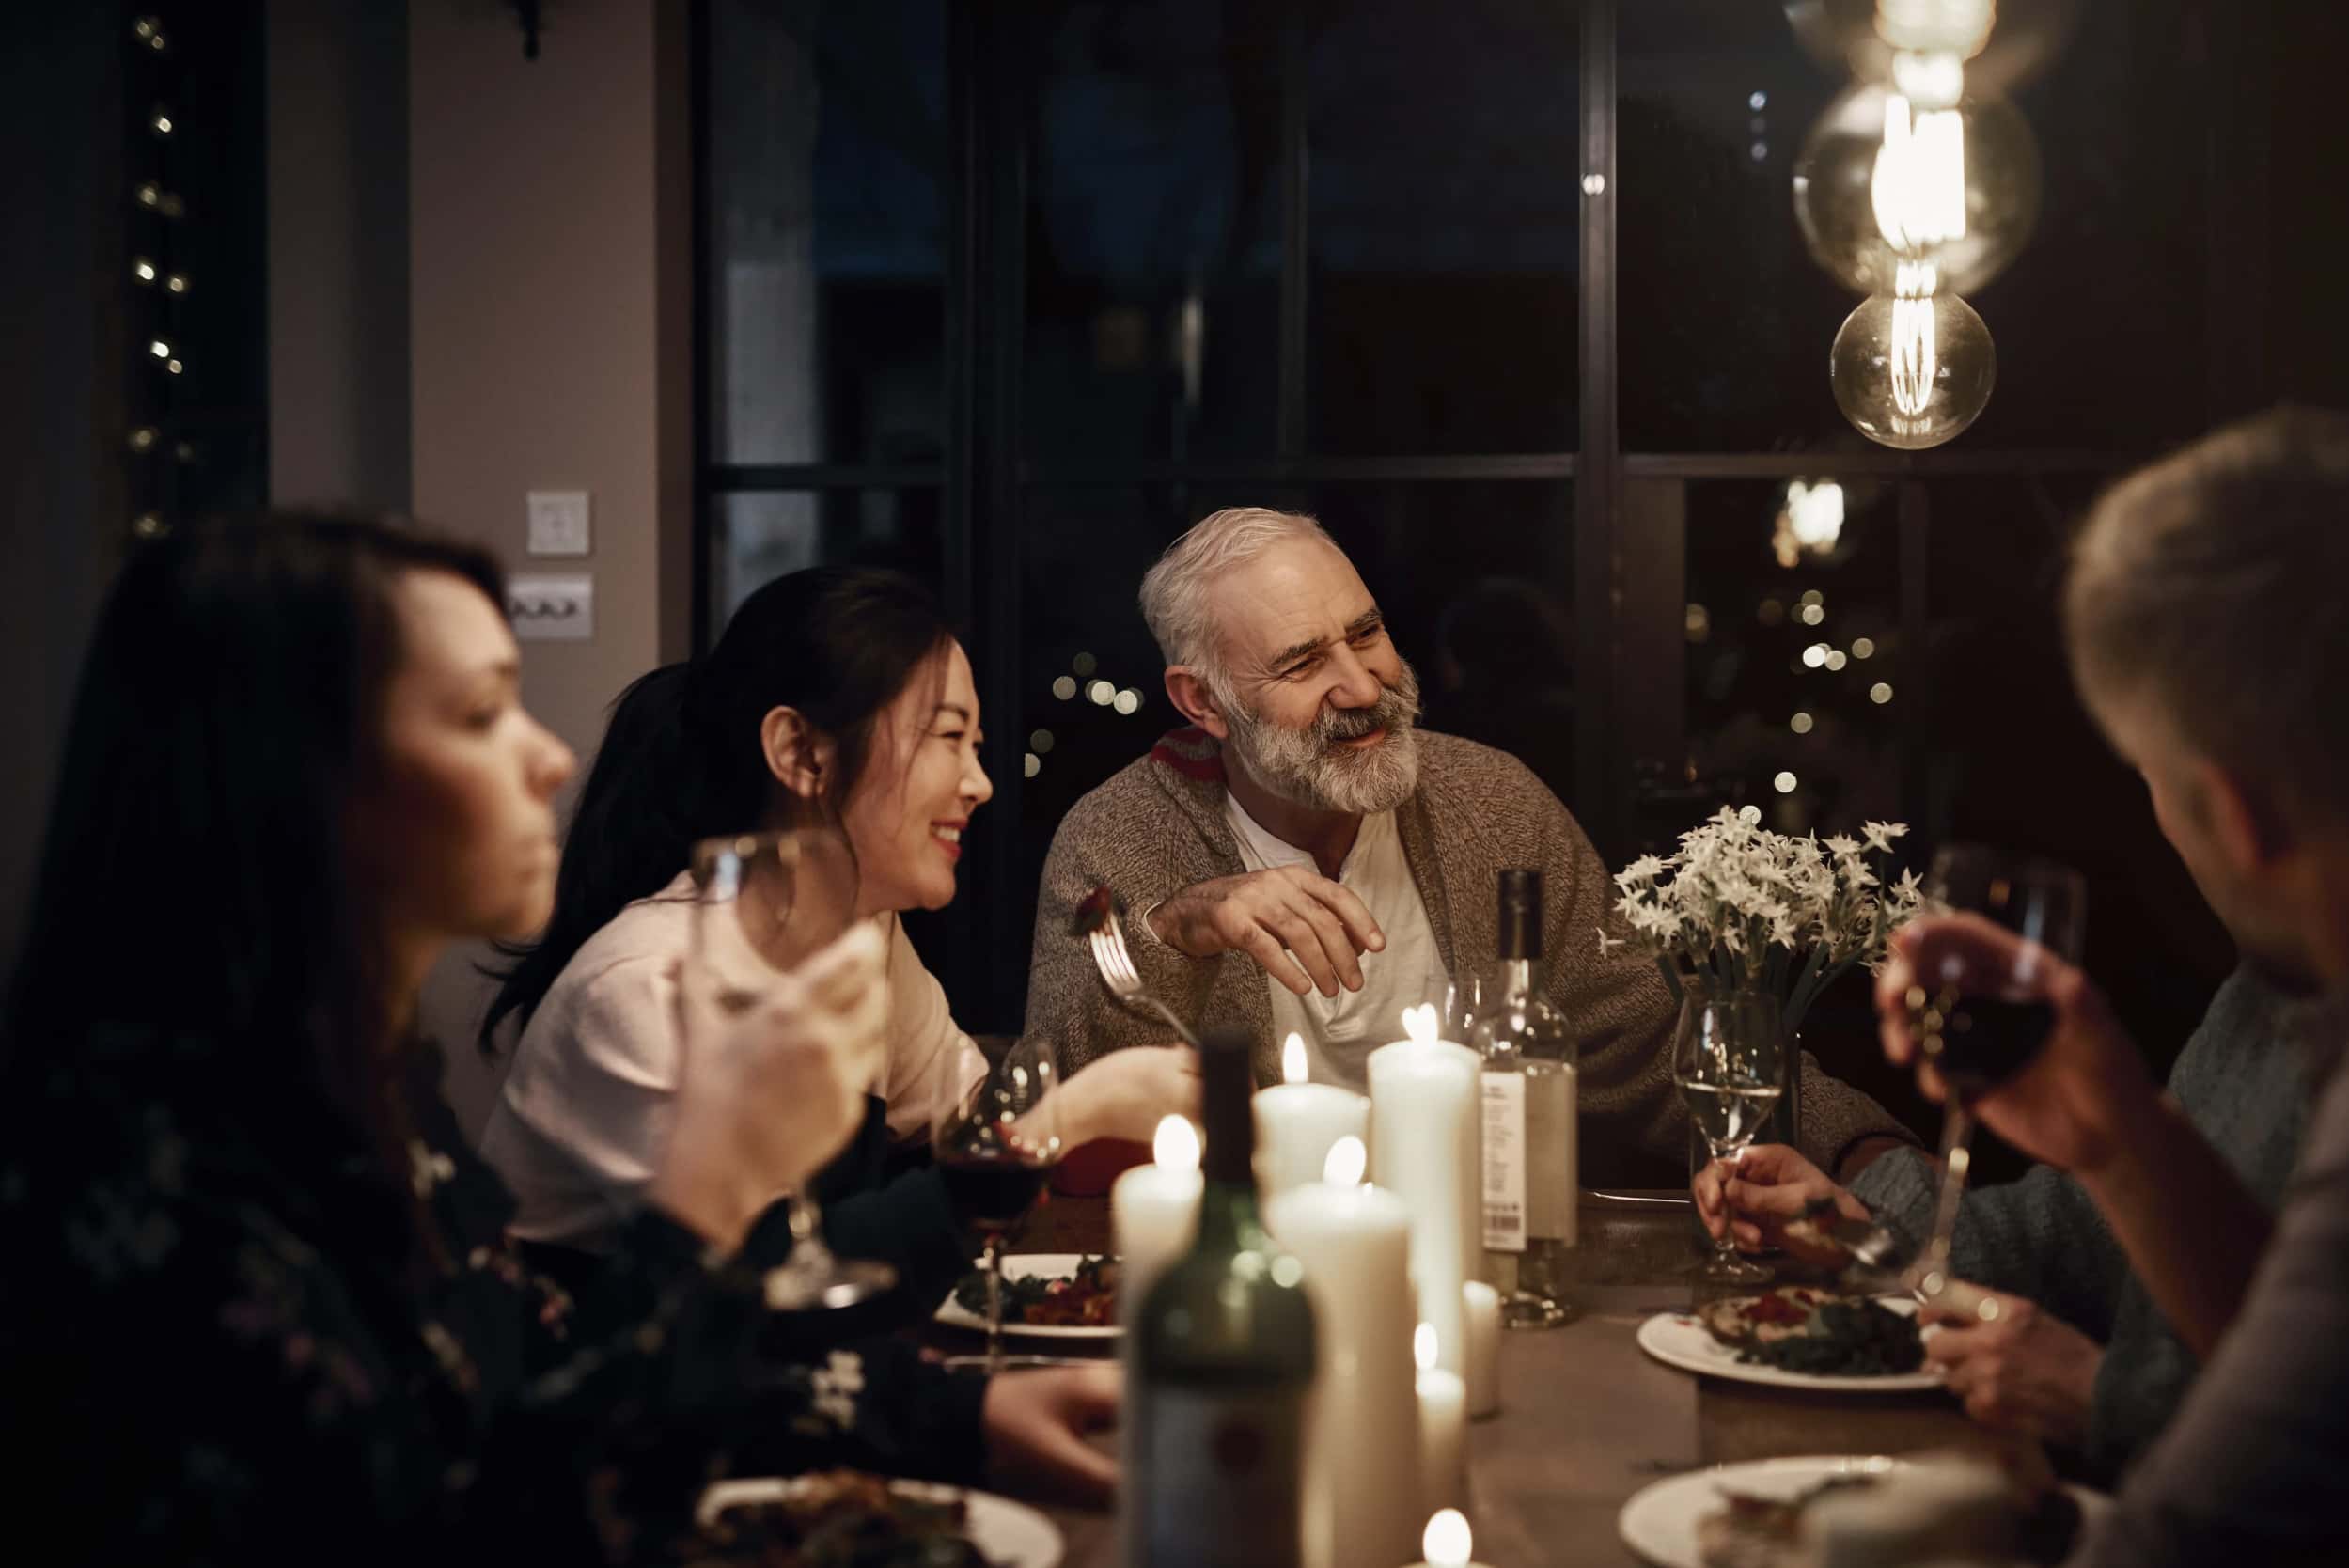 Christmas-dinner-with-an-older-man-two-women-and-two-men-sat-around-a-filled-table